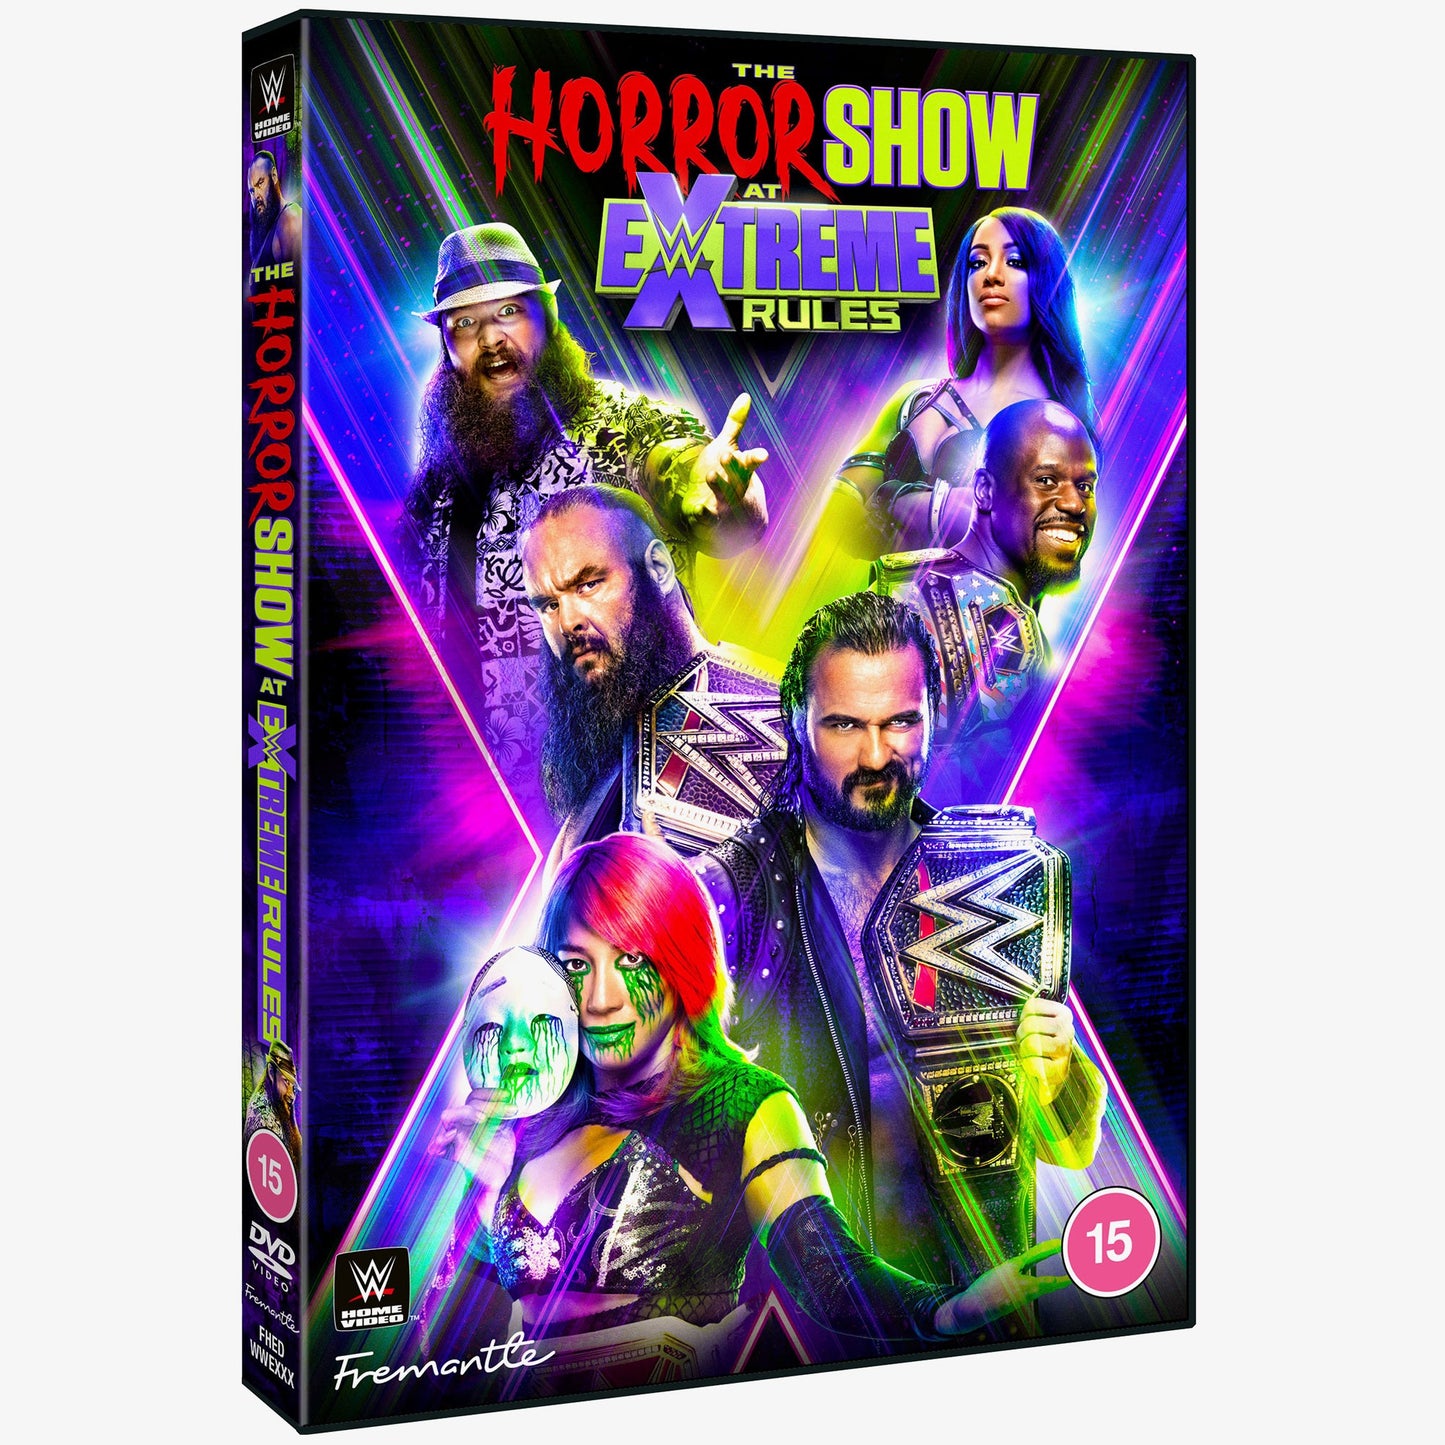 WWE Extreme Rules 2020 DVD